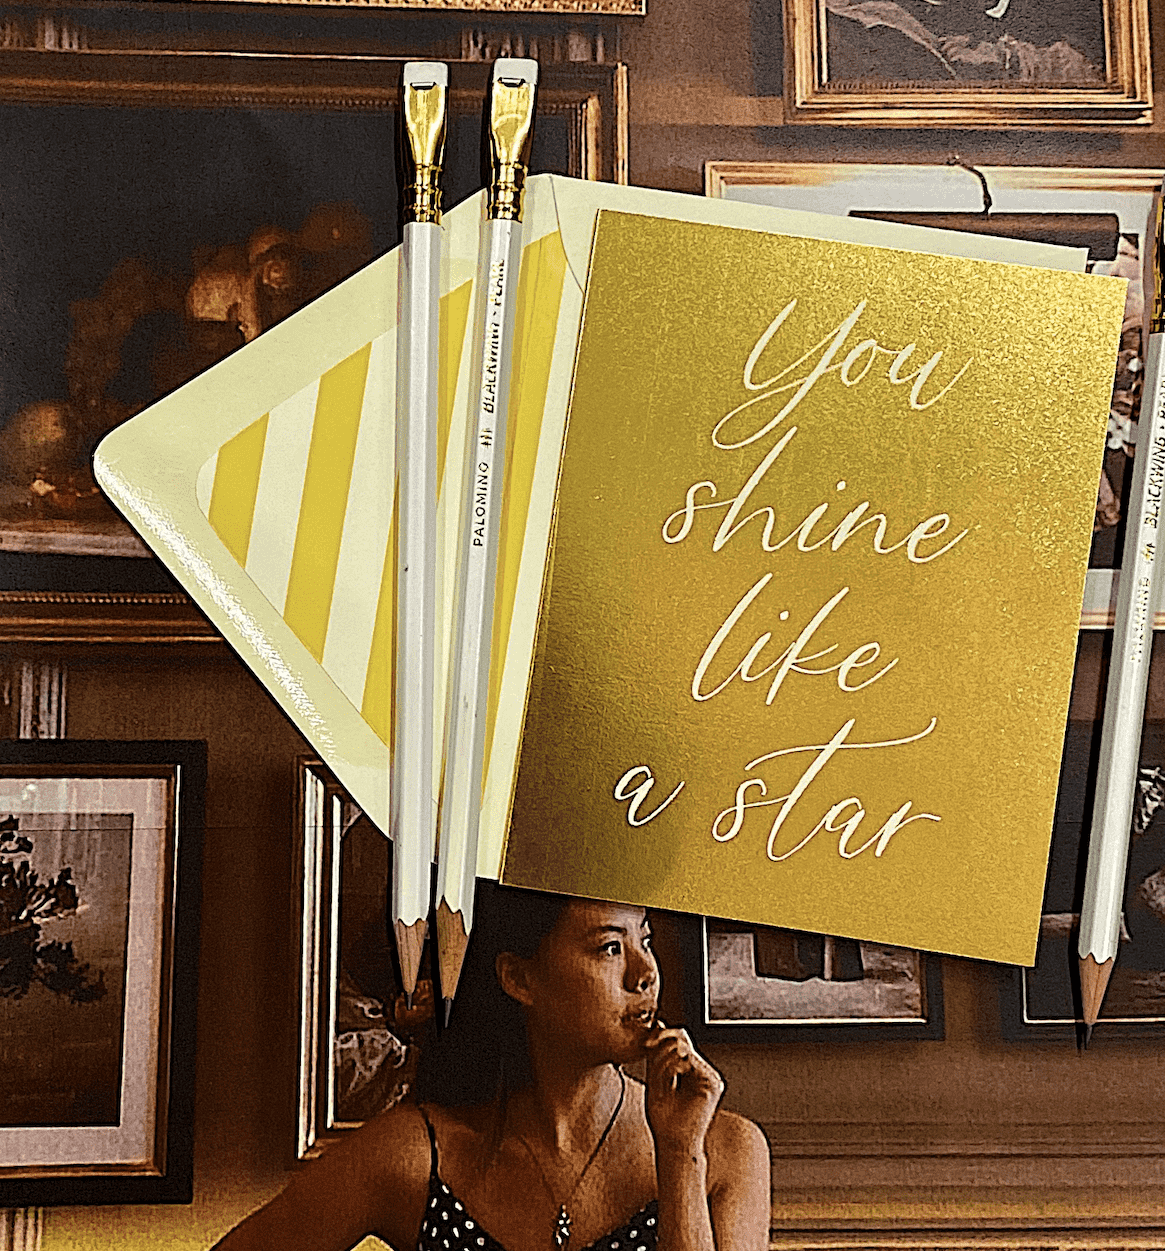 Bensgarden.com | You Shine Like A Star Greeting Card, Single Folded Card or Boxed Set of 8 - Ben's Garden. Made in New York City.